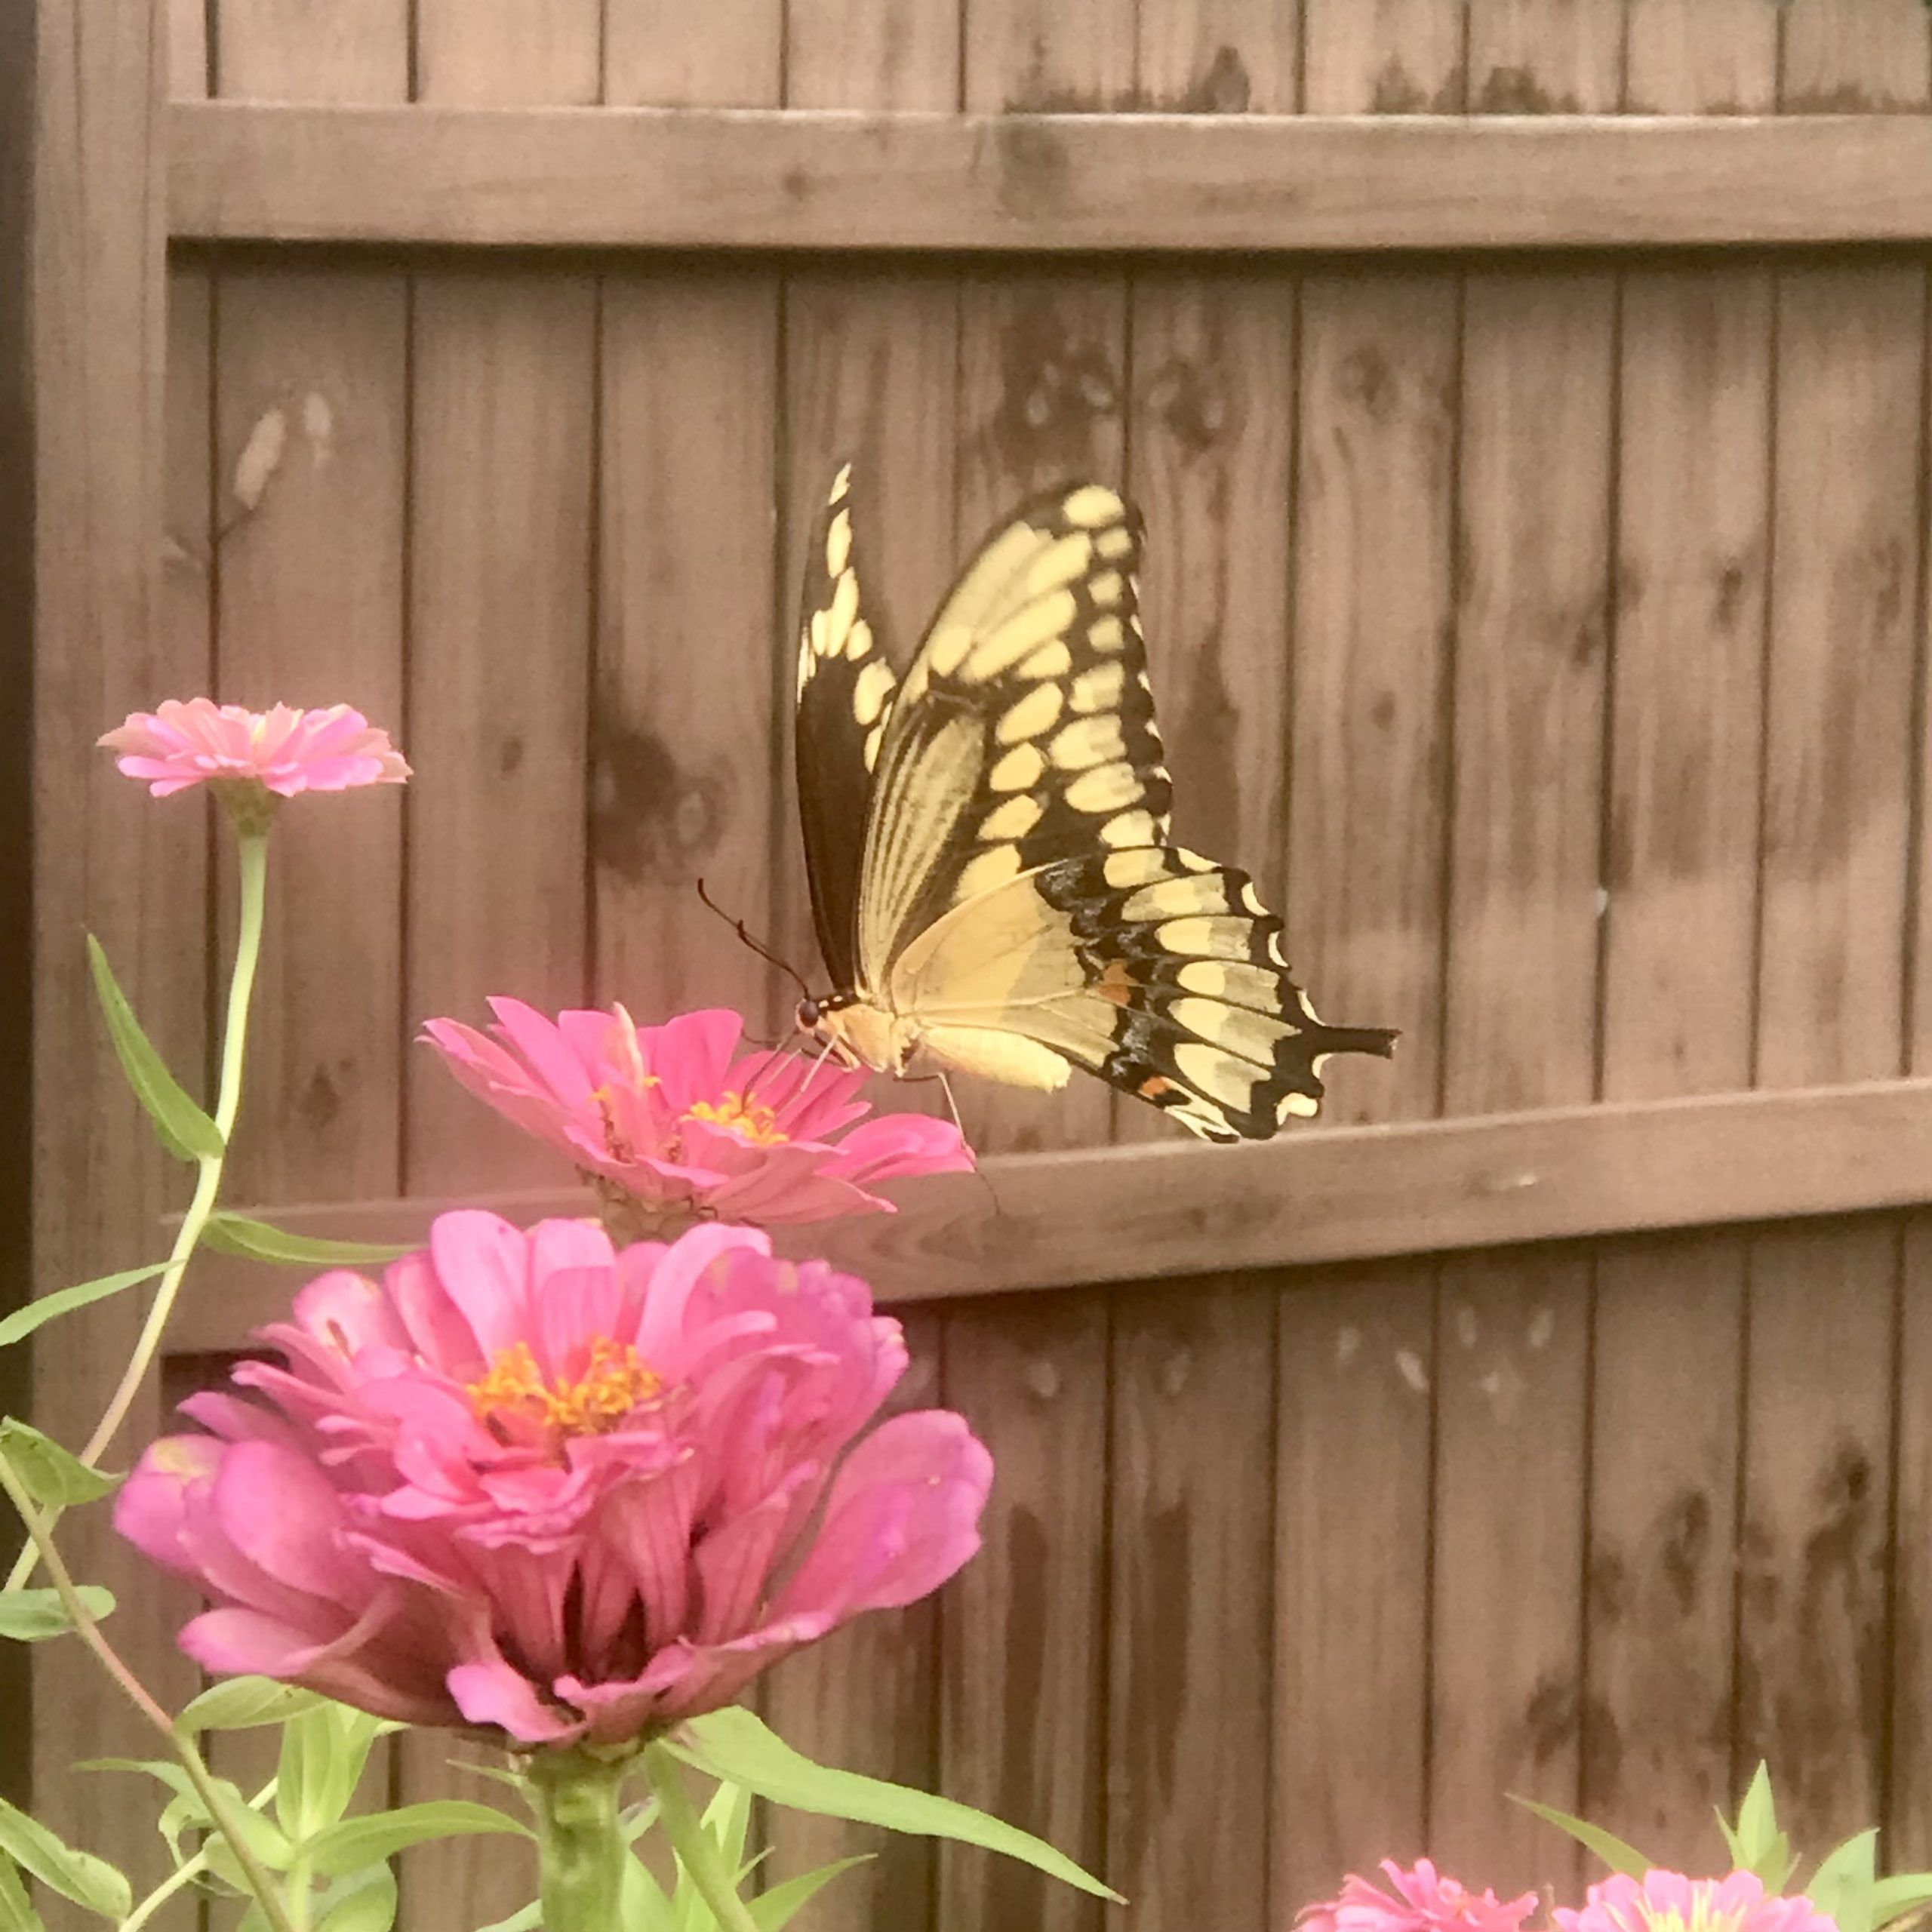 Today's Photo of the Day comes from Heidi Moore. Heidi spotted this giant swallowtail butterfly in her zinnia garden back in September.

"It's so amazing to compare the side view, as it is totally different," Heidi said.